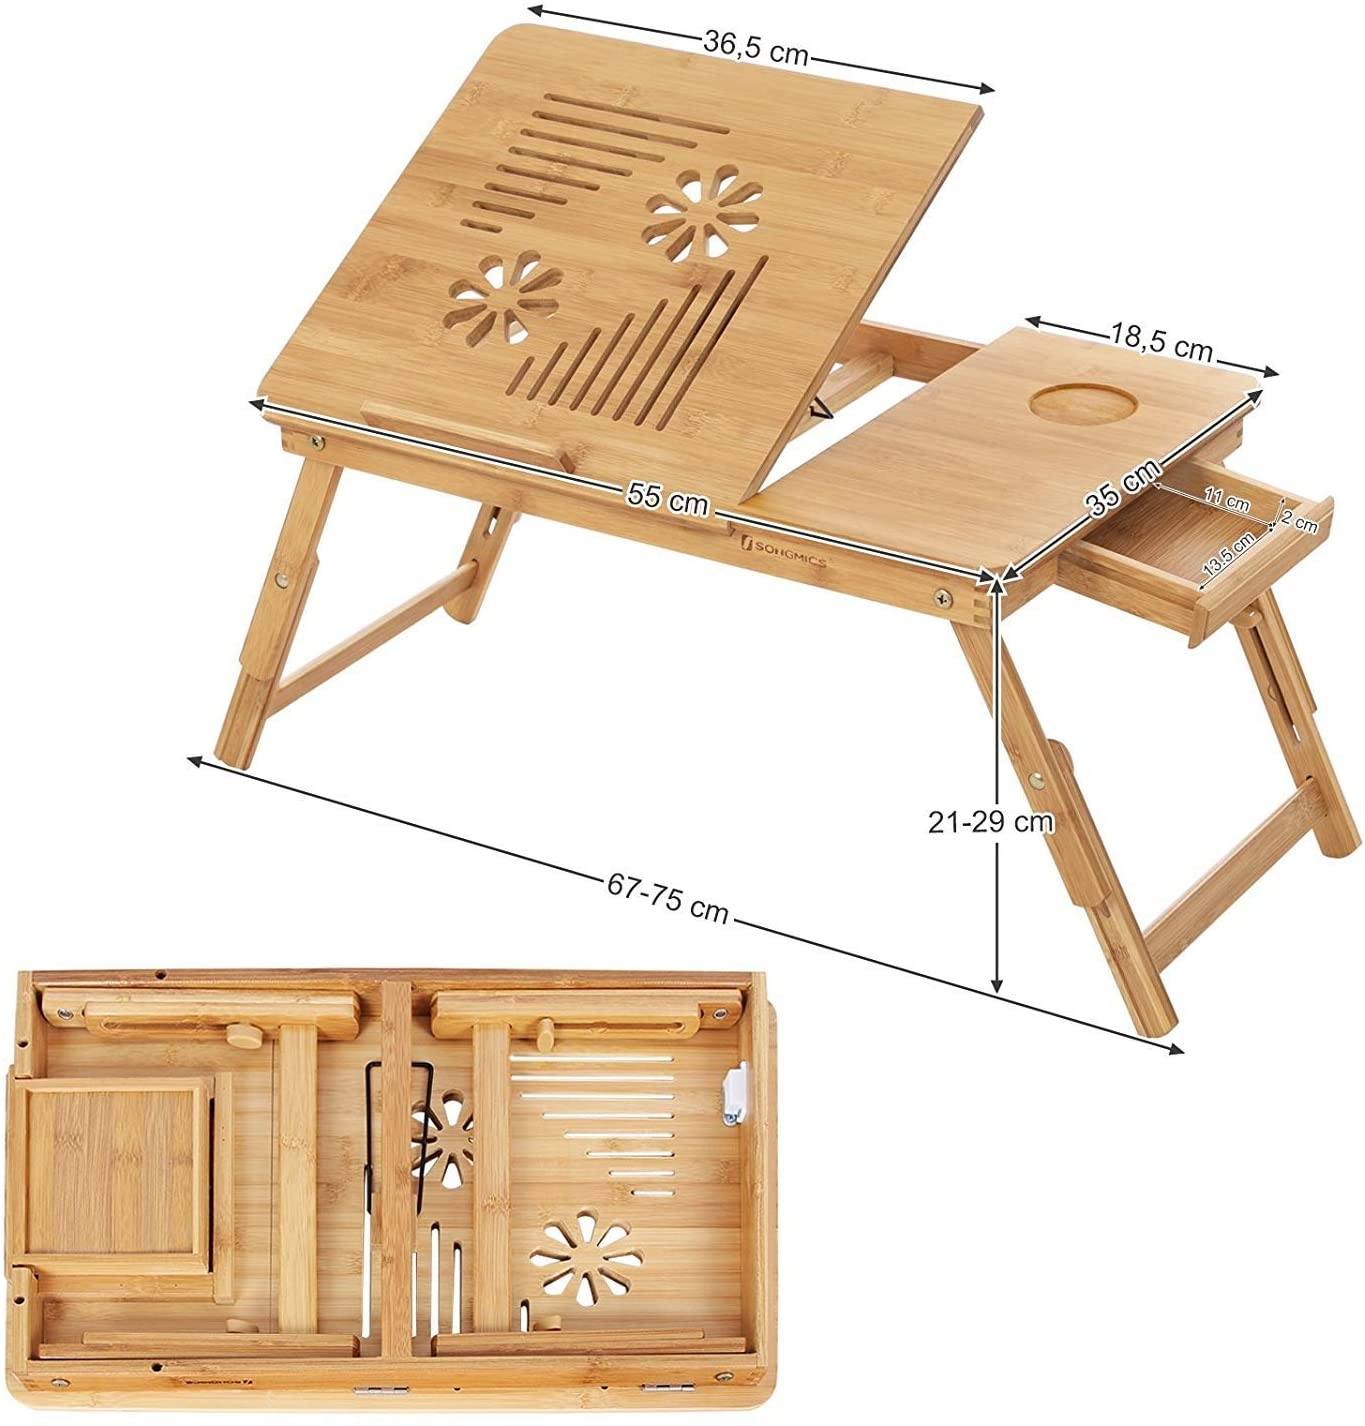 Adjustable Laptop Table Folding Lapdesk PC Desktop Notebook Stand Sofa Desk Bamboo Bed Tray with Drawer LLD002 RAW58.dk